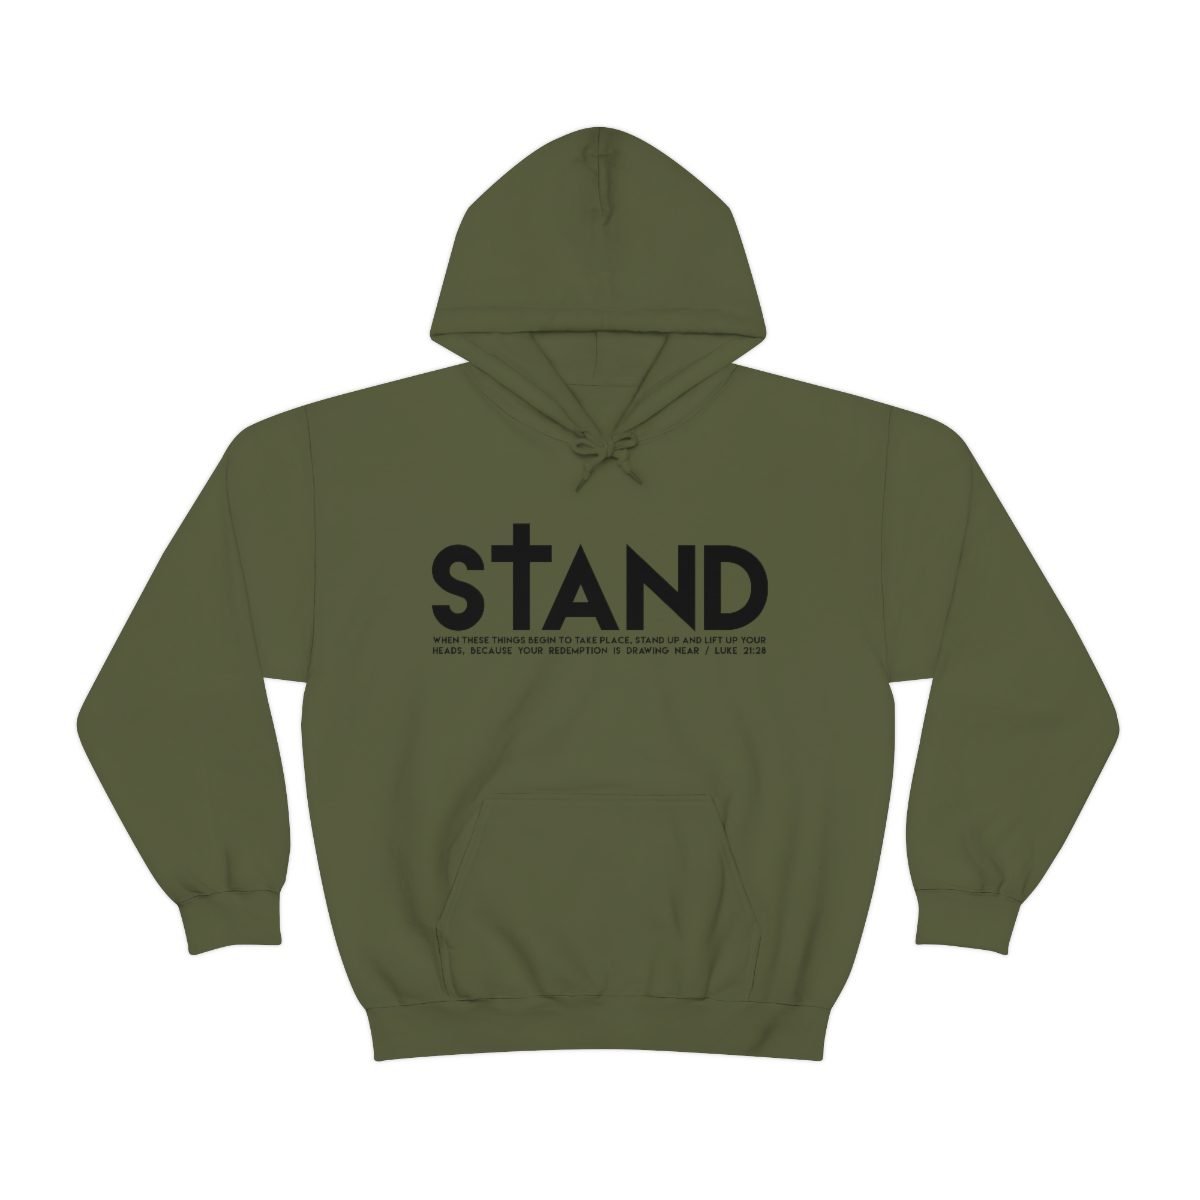 STAND by Designs of Defiance Pullover Hooded Sweatshirt